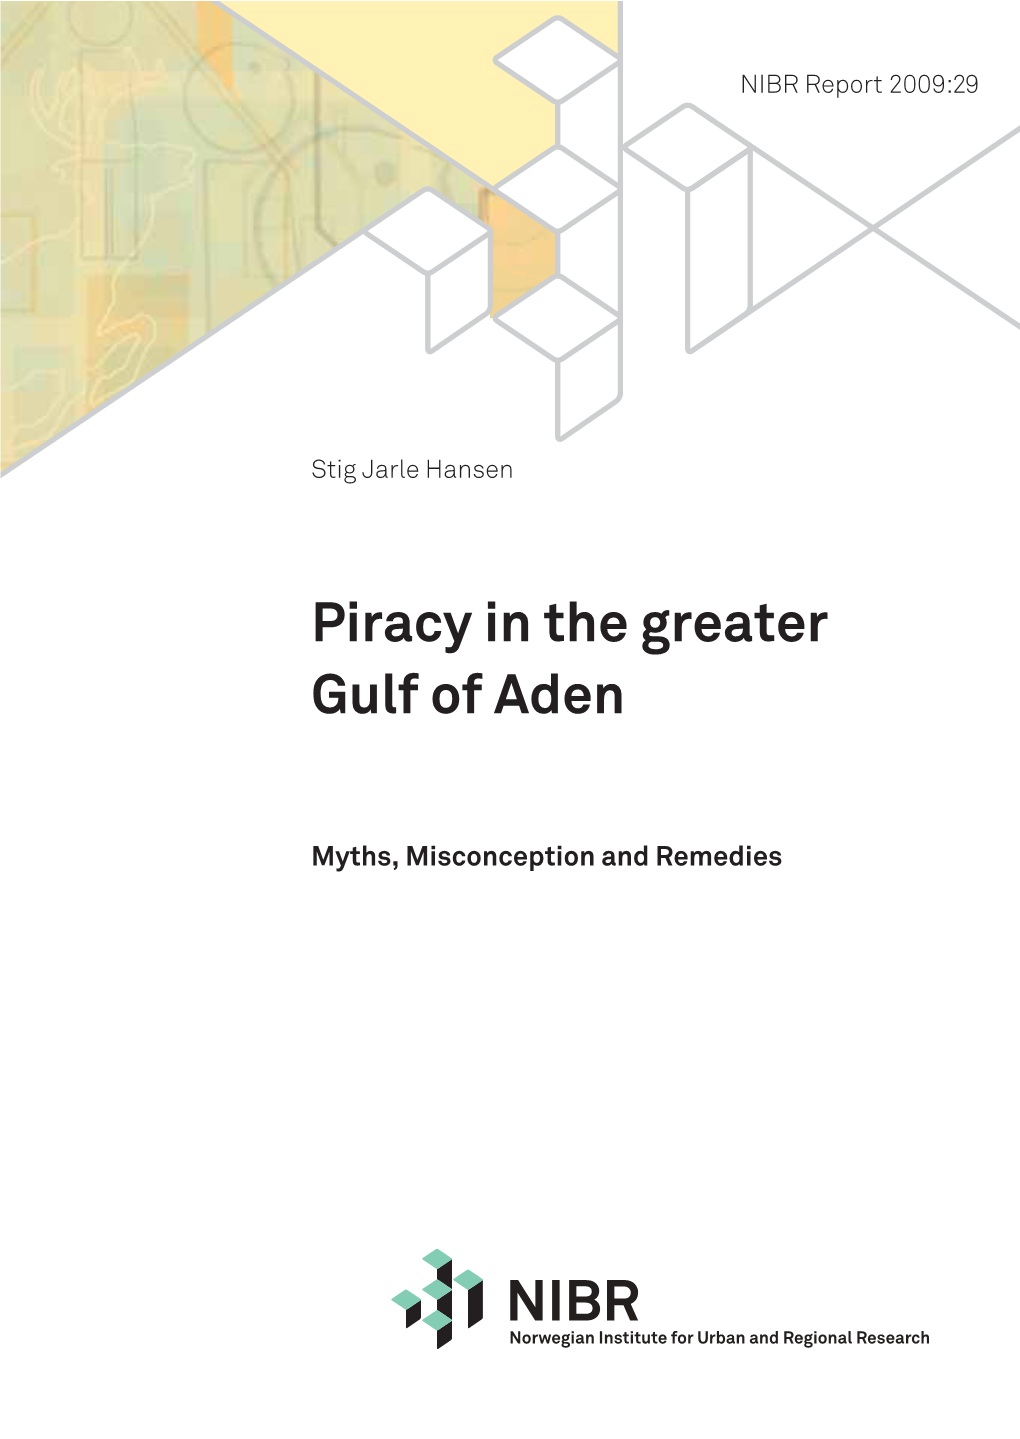 Piracy in the Greater Gulf of Aden